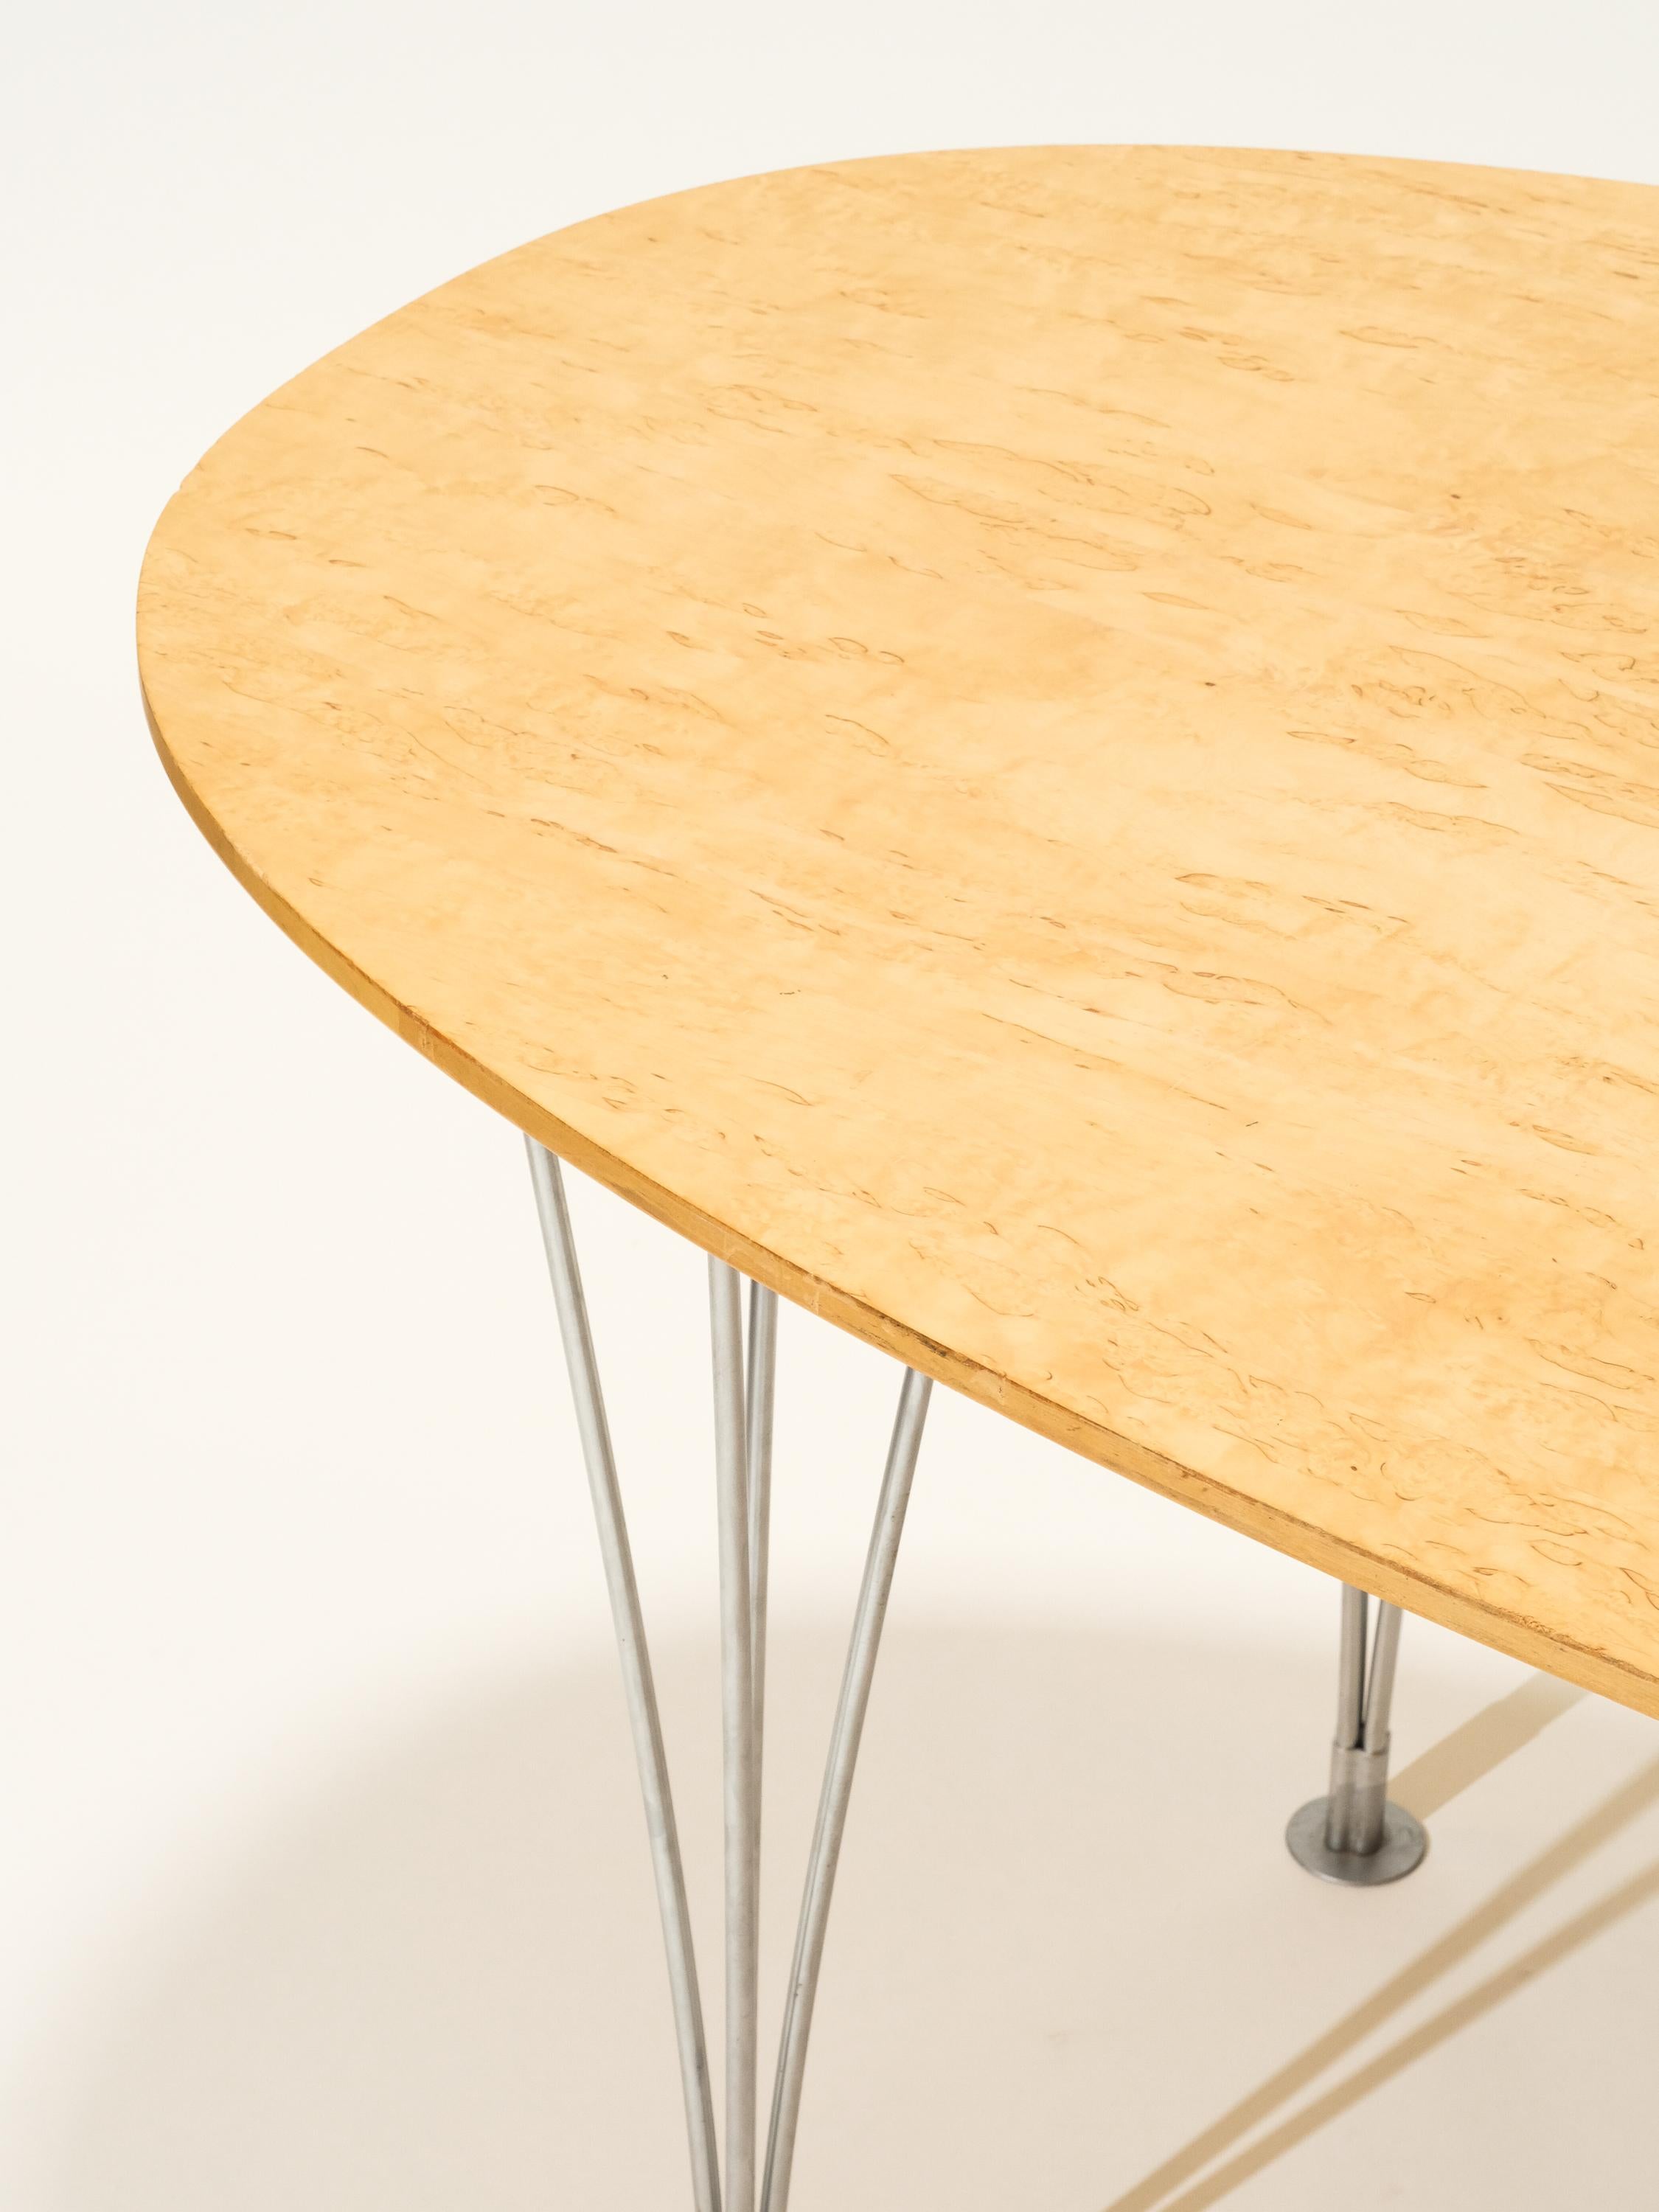 Vintage Super Ellipse Dining Table by Bruno Mathsson in Masur Birch In Good Condition For Sale In Helsinki, FI